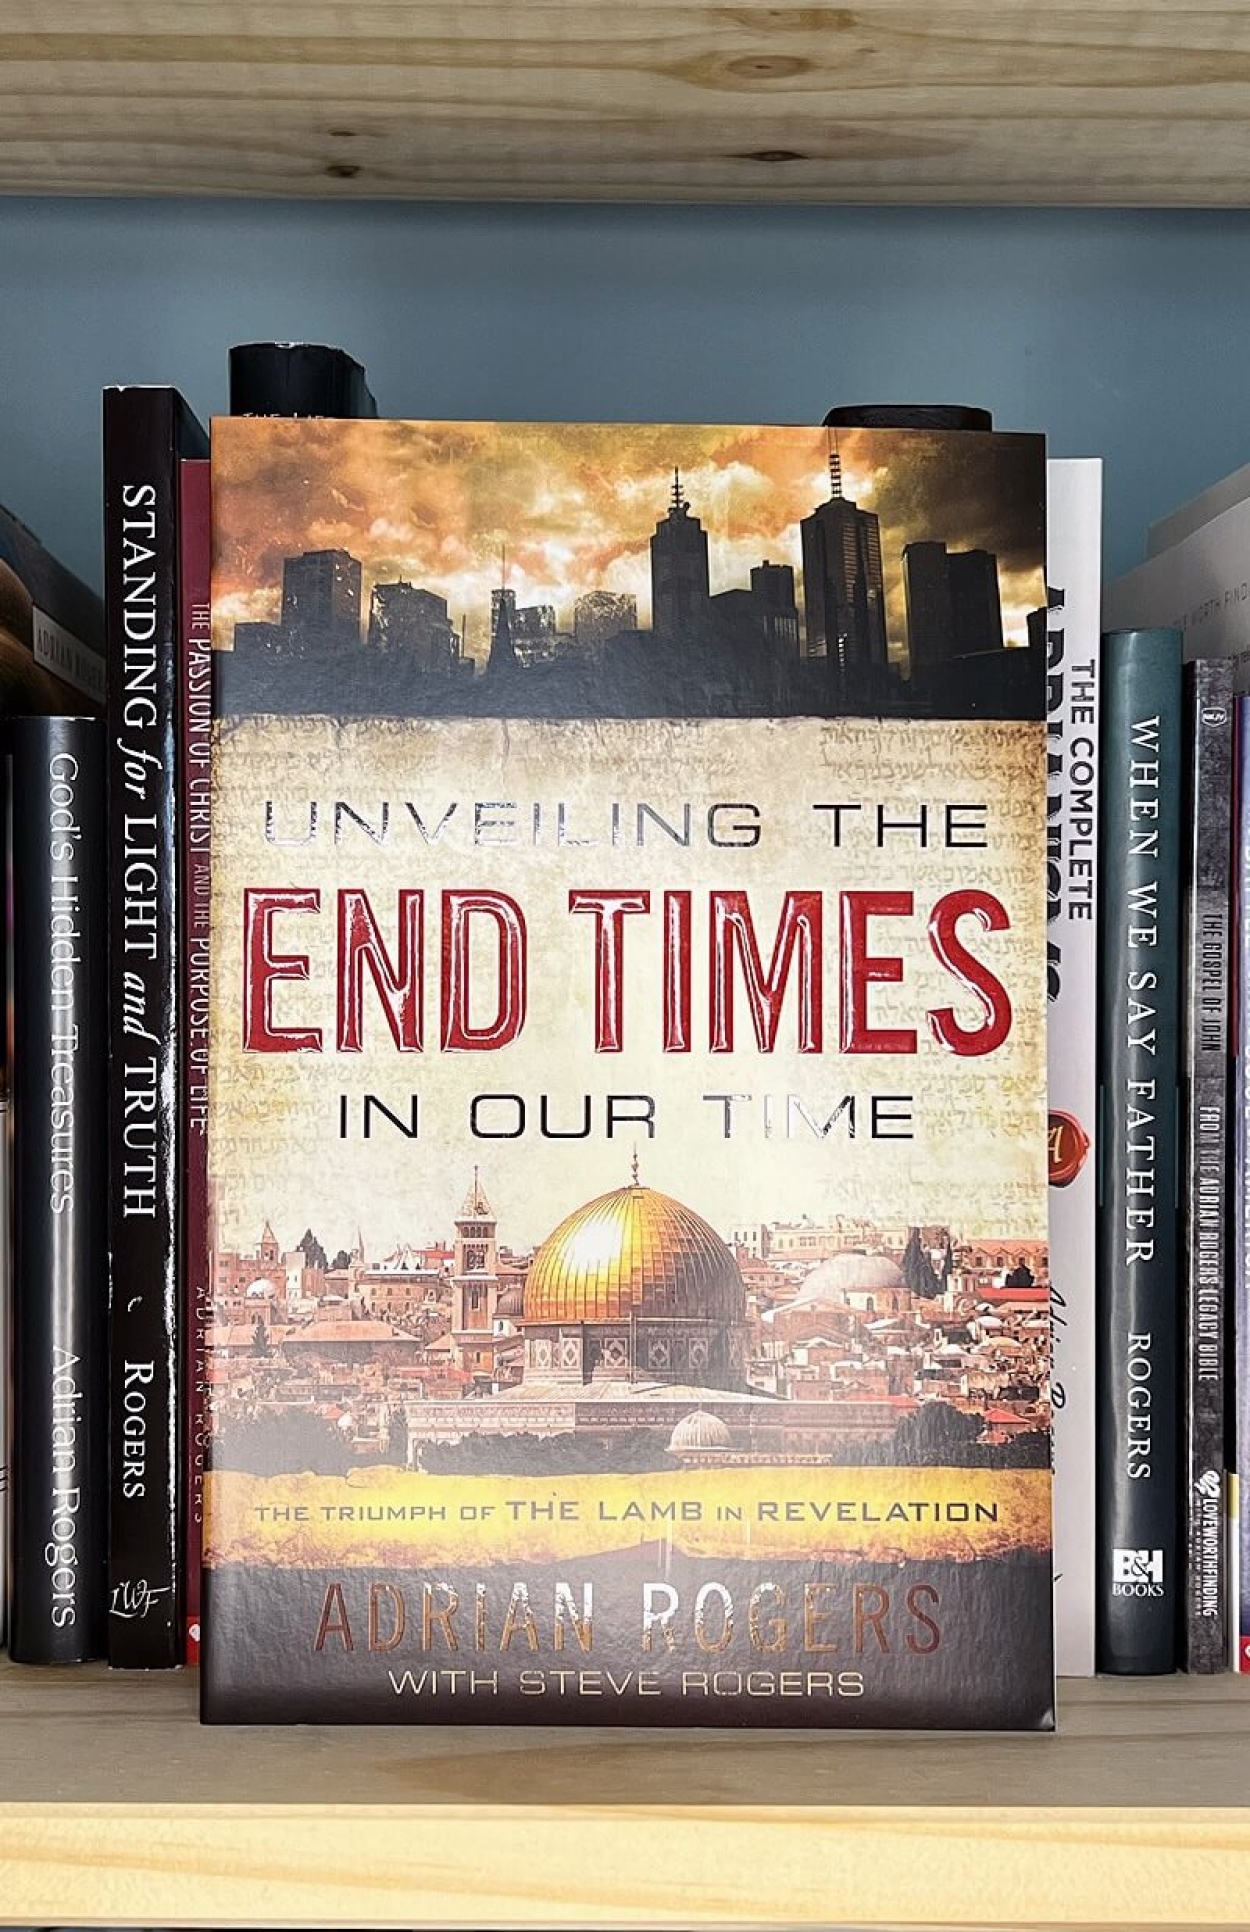 B129 unveiling the end times in our time book BOOKSHELF